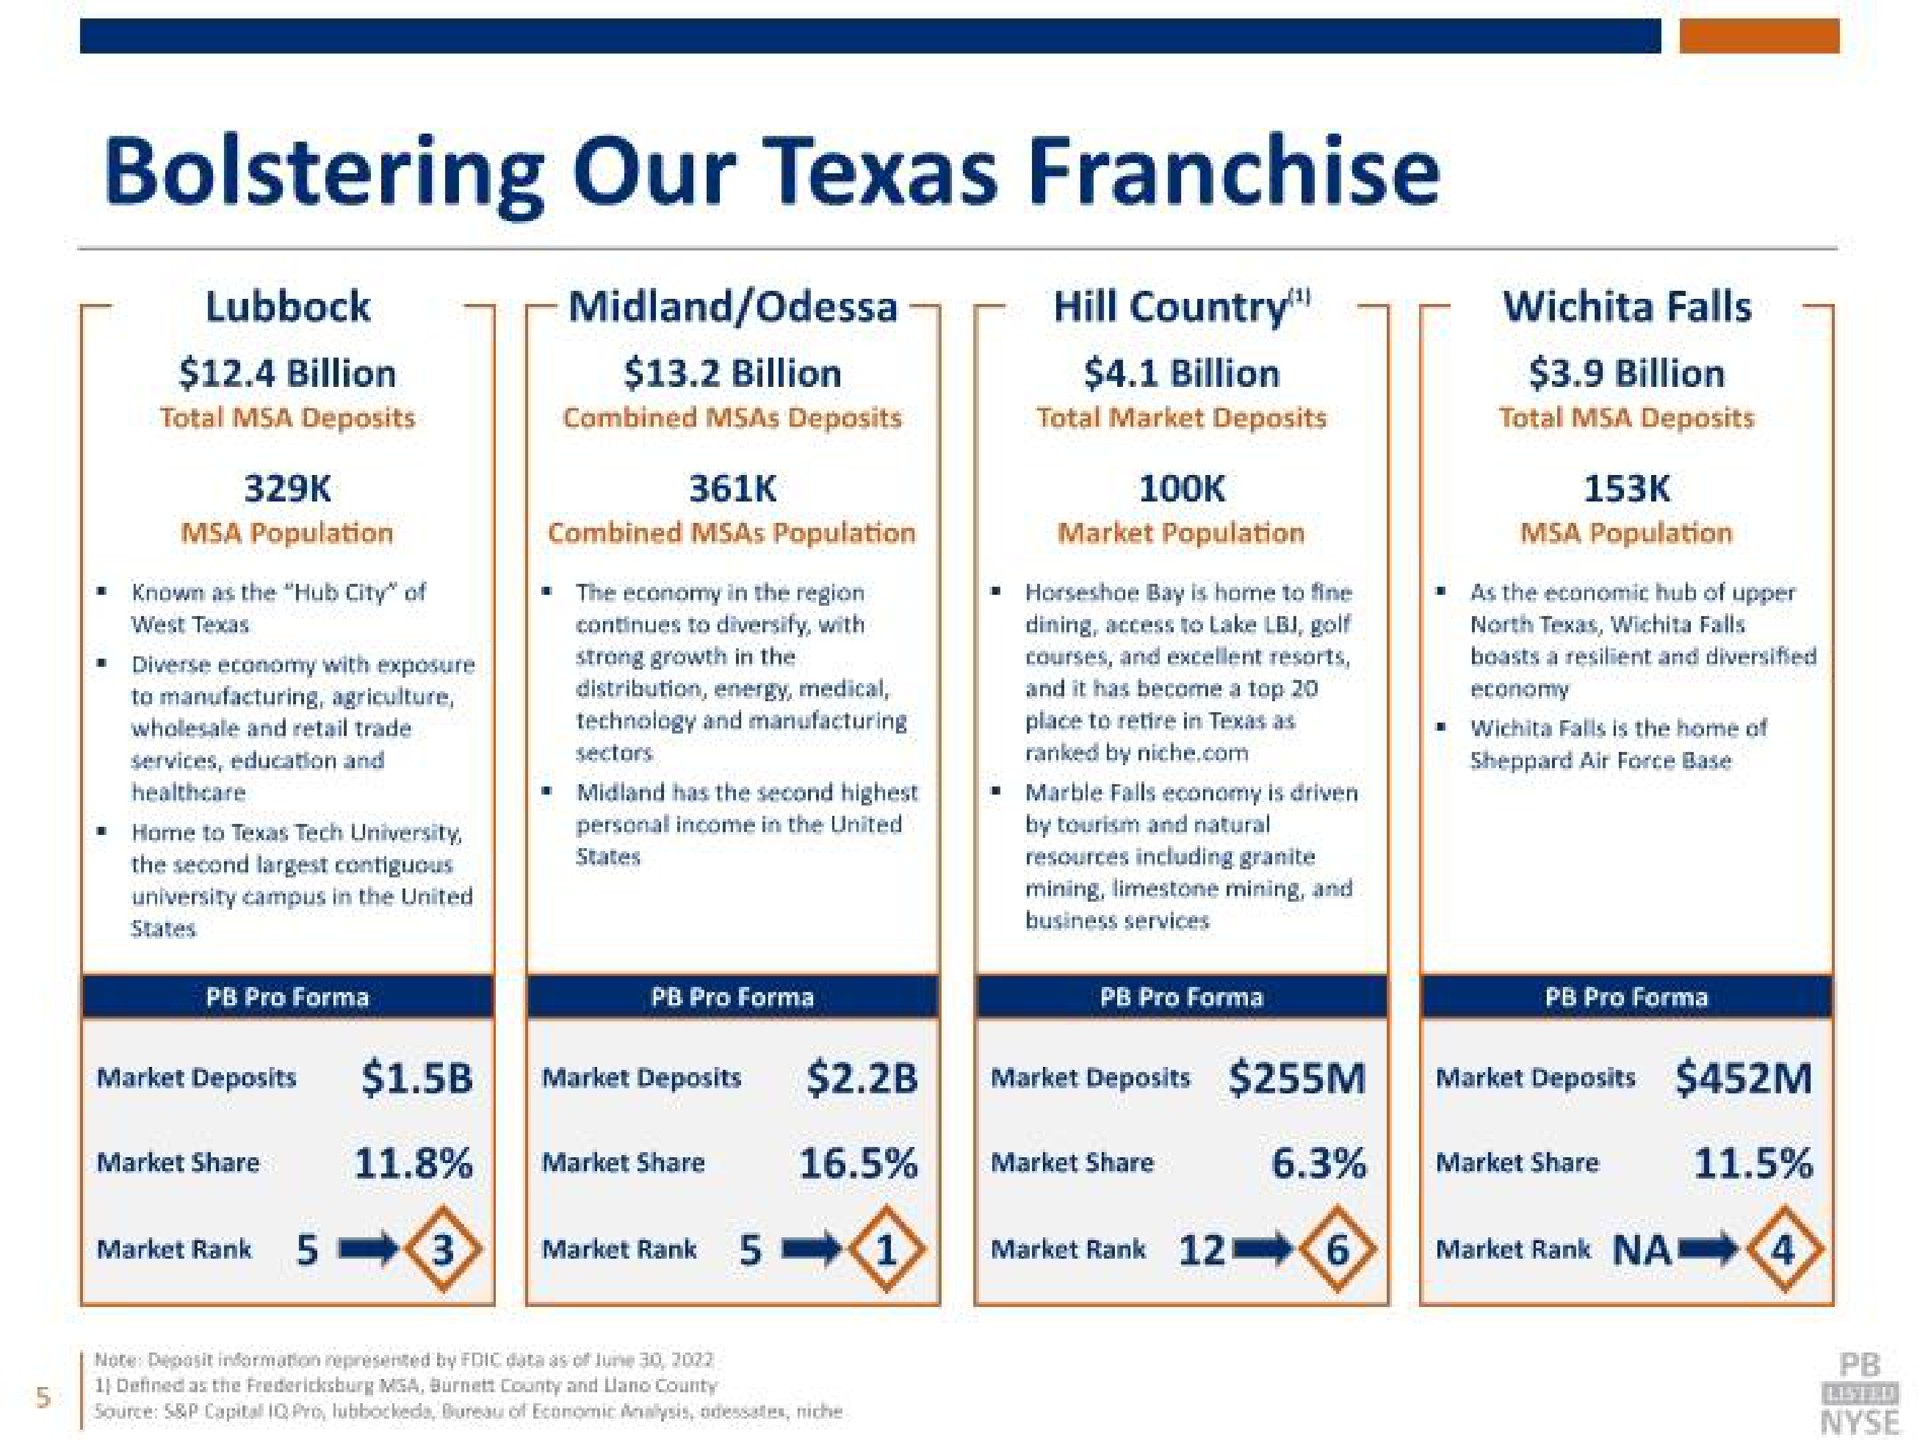 bolstering our franchise | Prosperity Bancshares